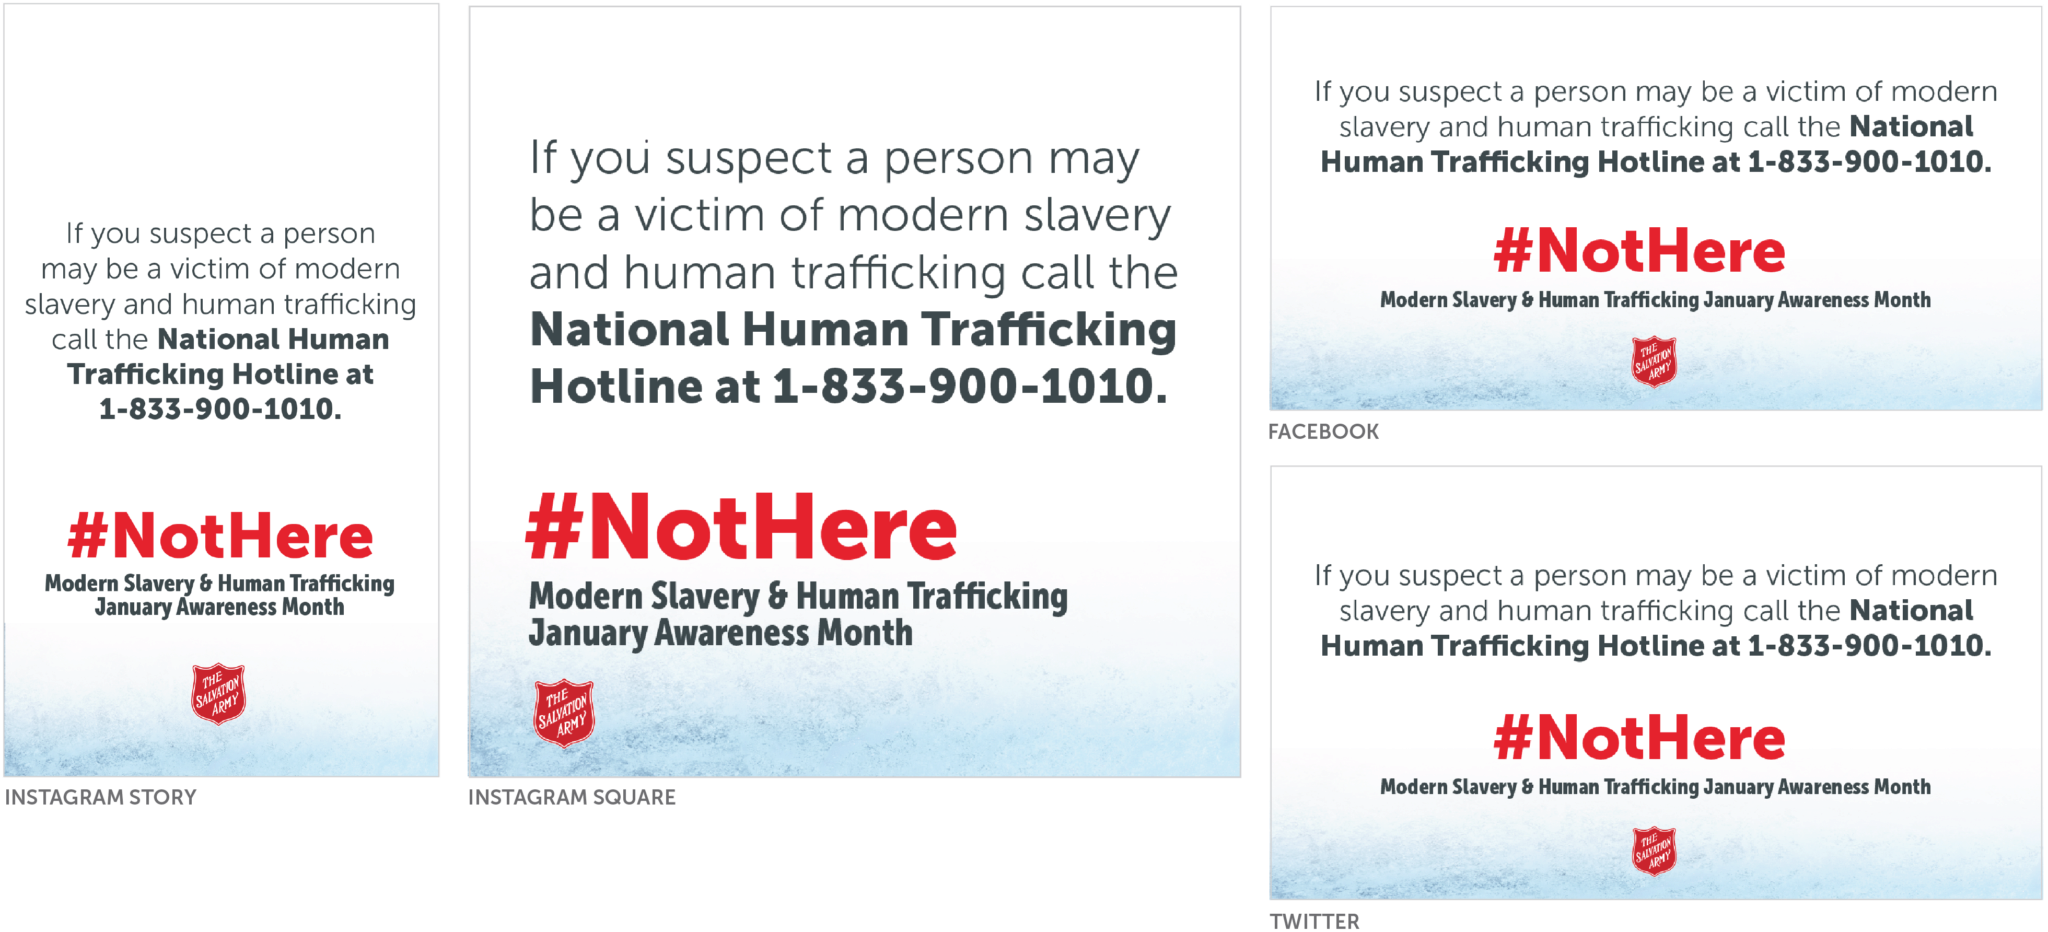 Social media asset : If you suspect a person may be a victim of modern slavery and human trafficking call the National Human Trafficking Hotline at 1-833-900-1010